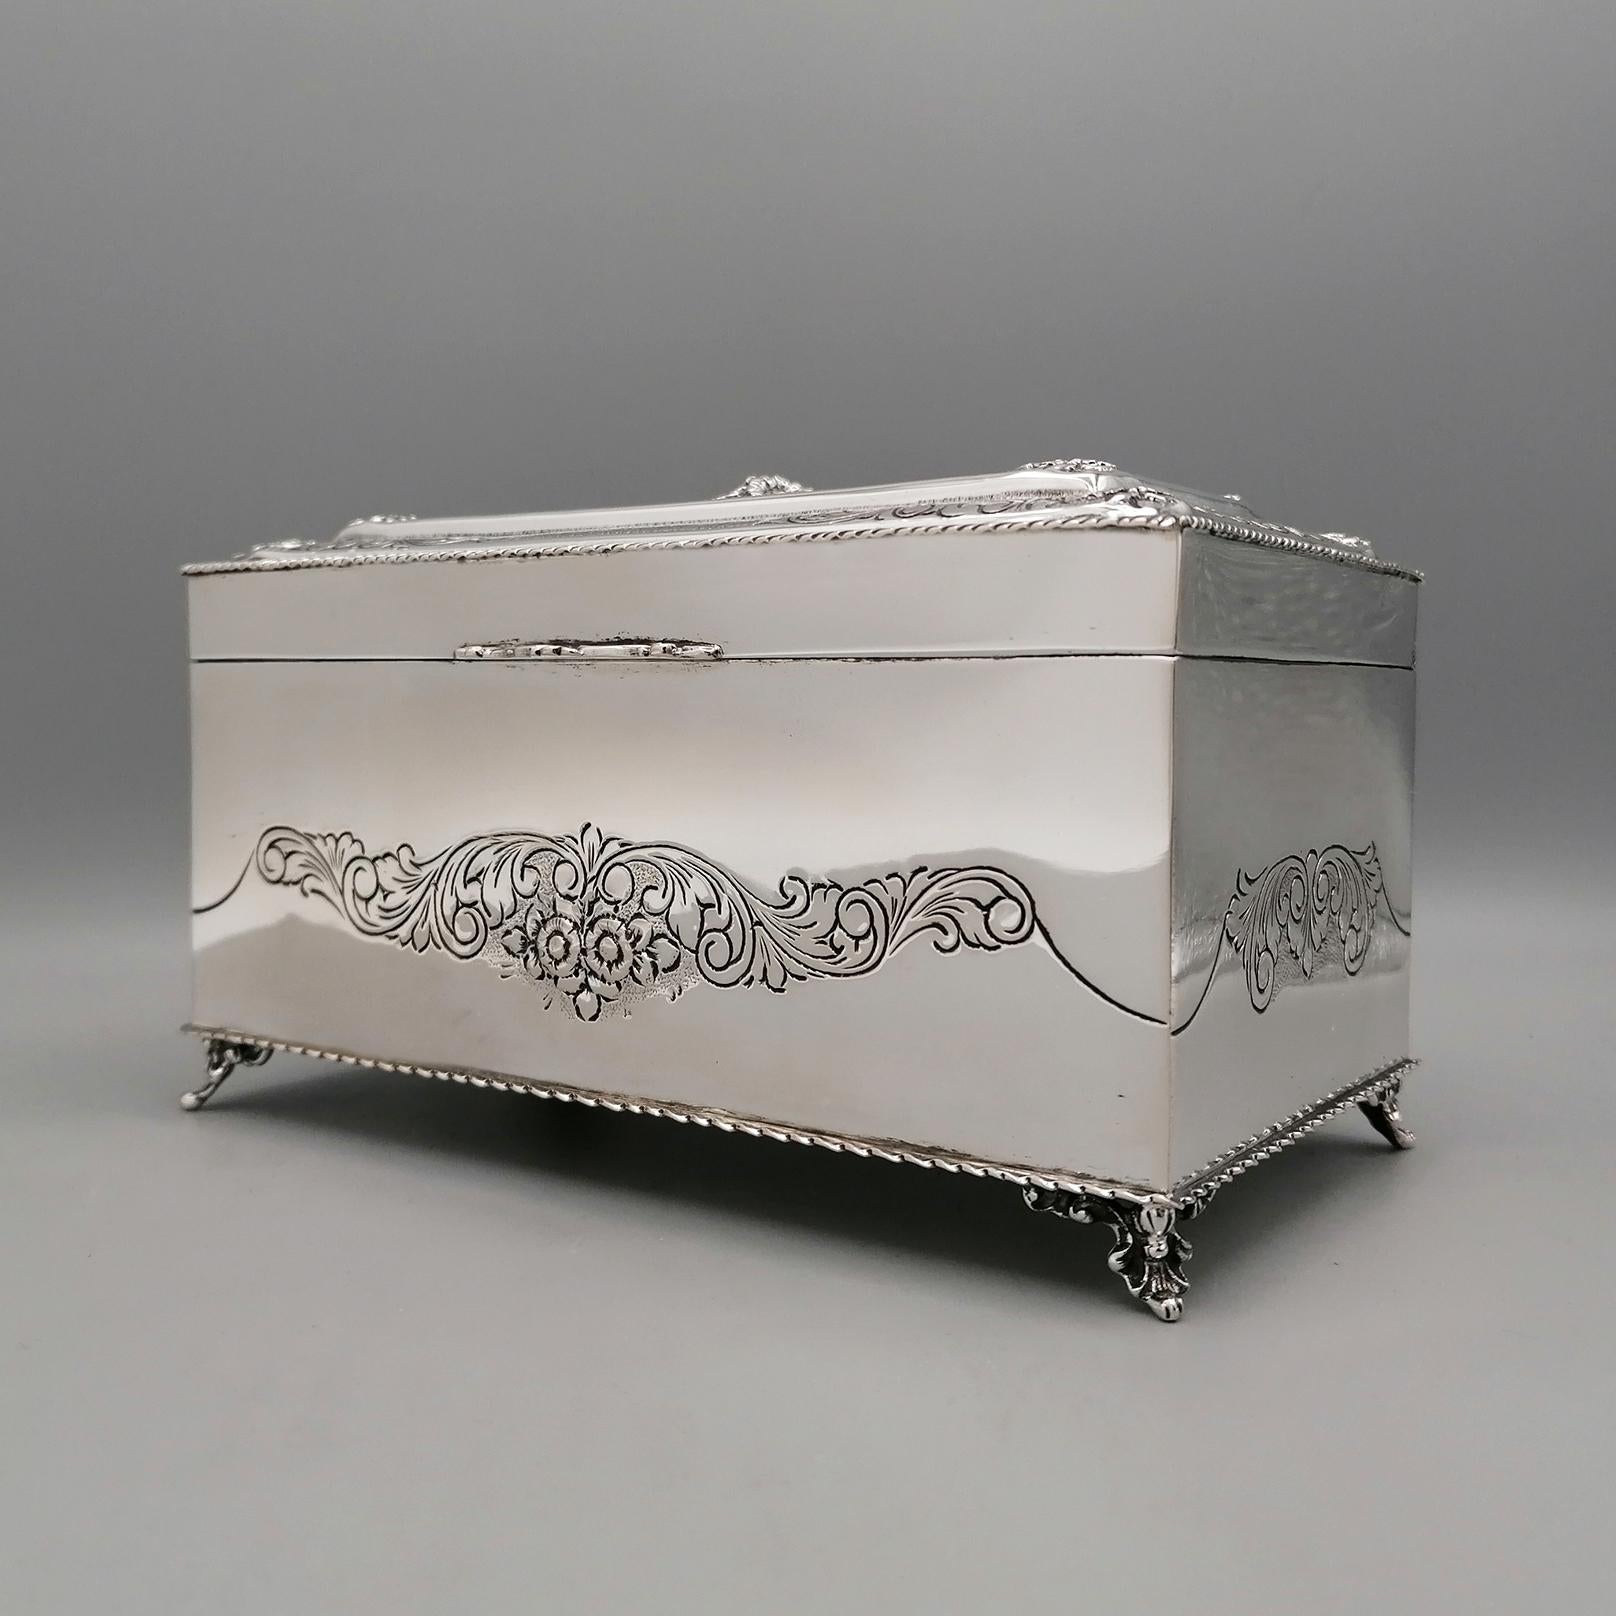 Forged 20th Century Italian 800 Solid Silver Jewel Box For Sale